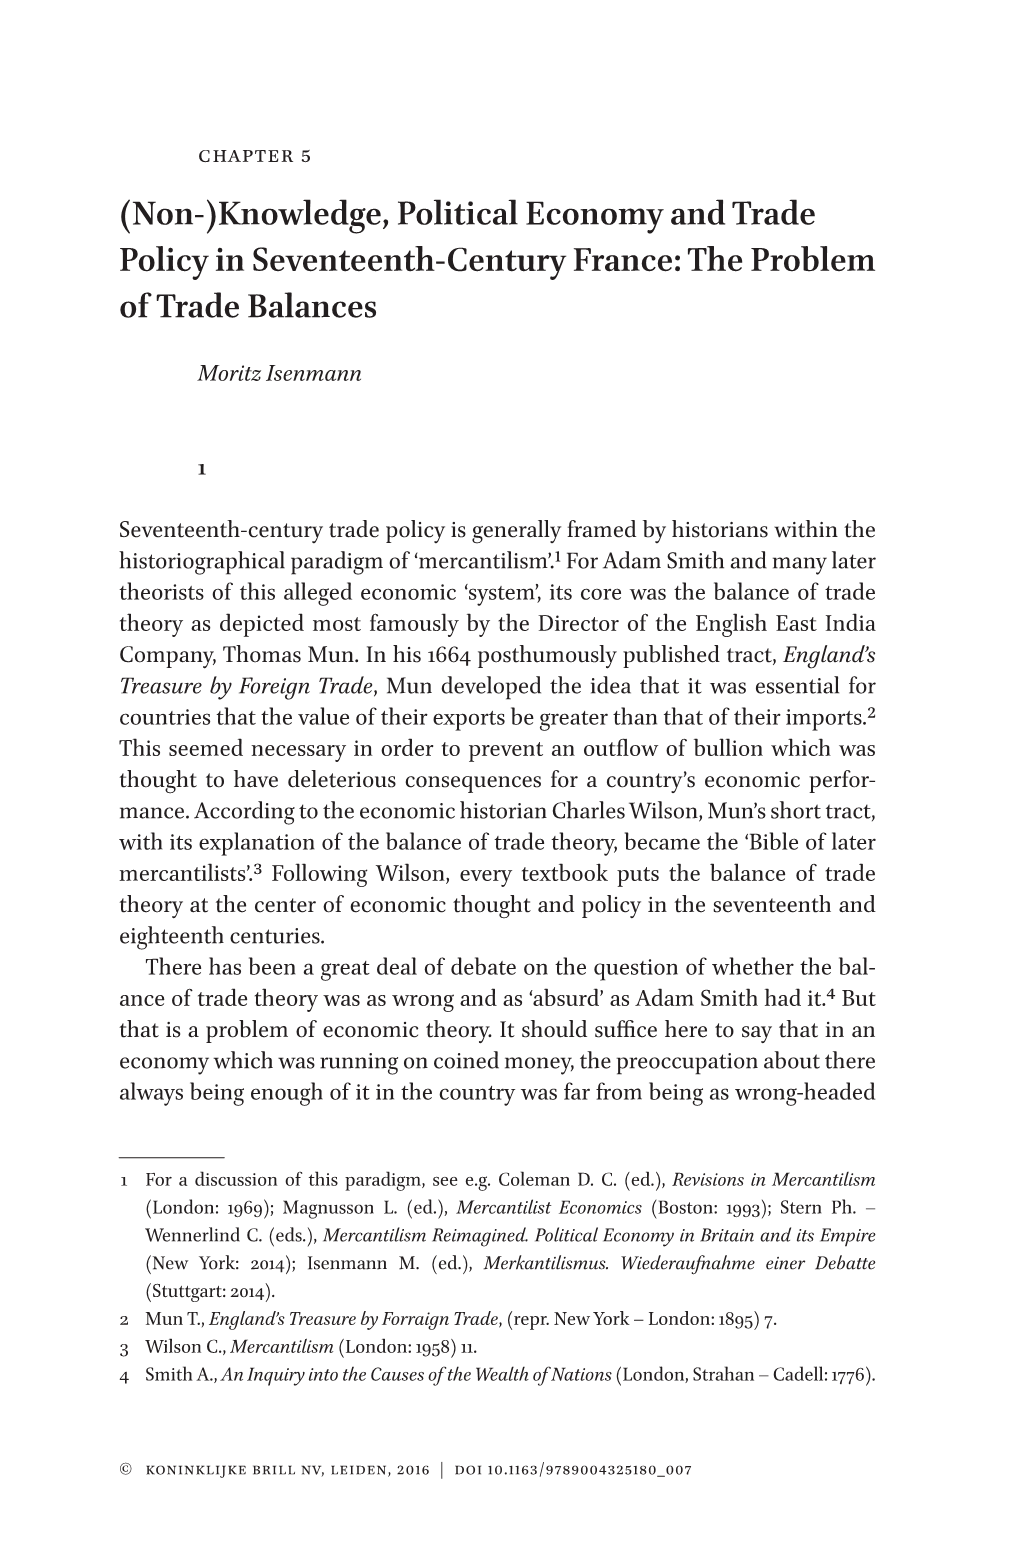 (Non-)Knowledge, Political Economy and Trade Policy in Seventeenth-Century France: the Problem of Trade Balances